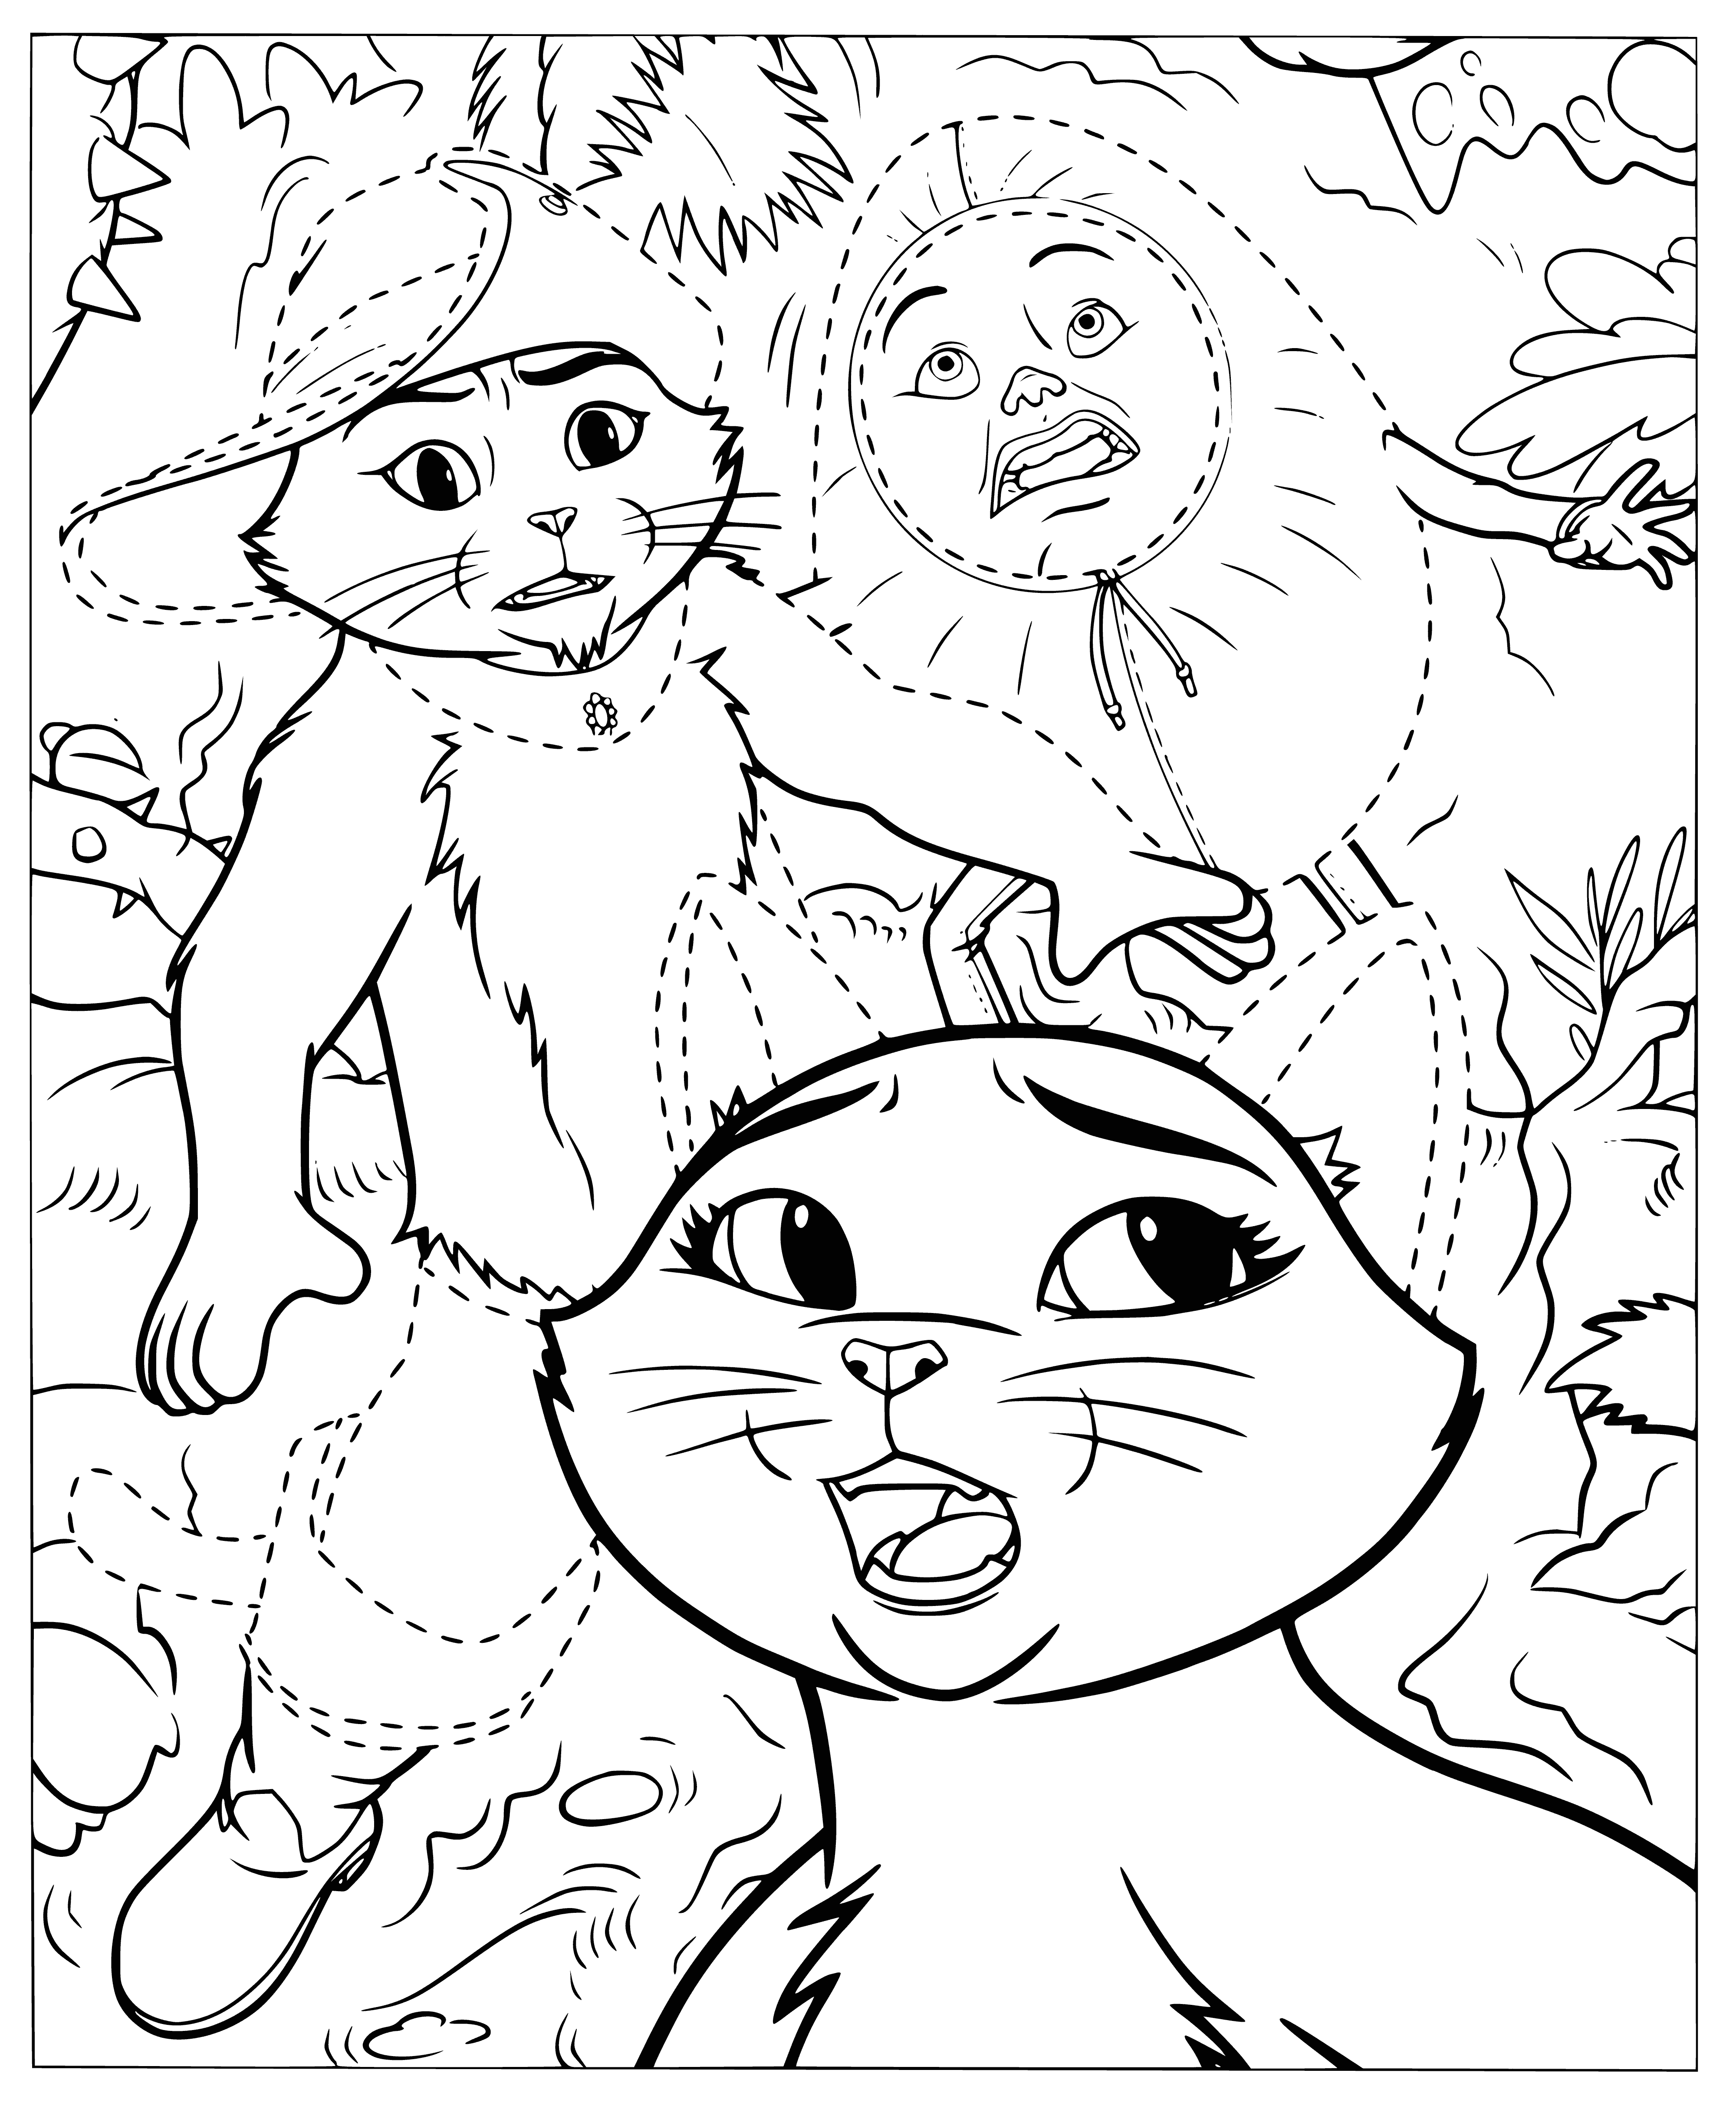 In the sky coloring page